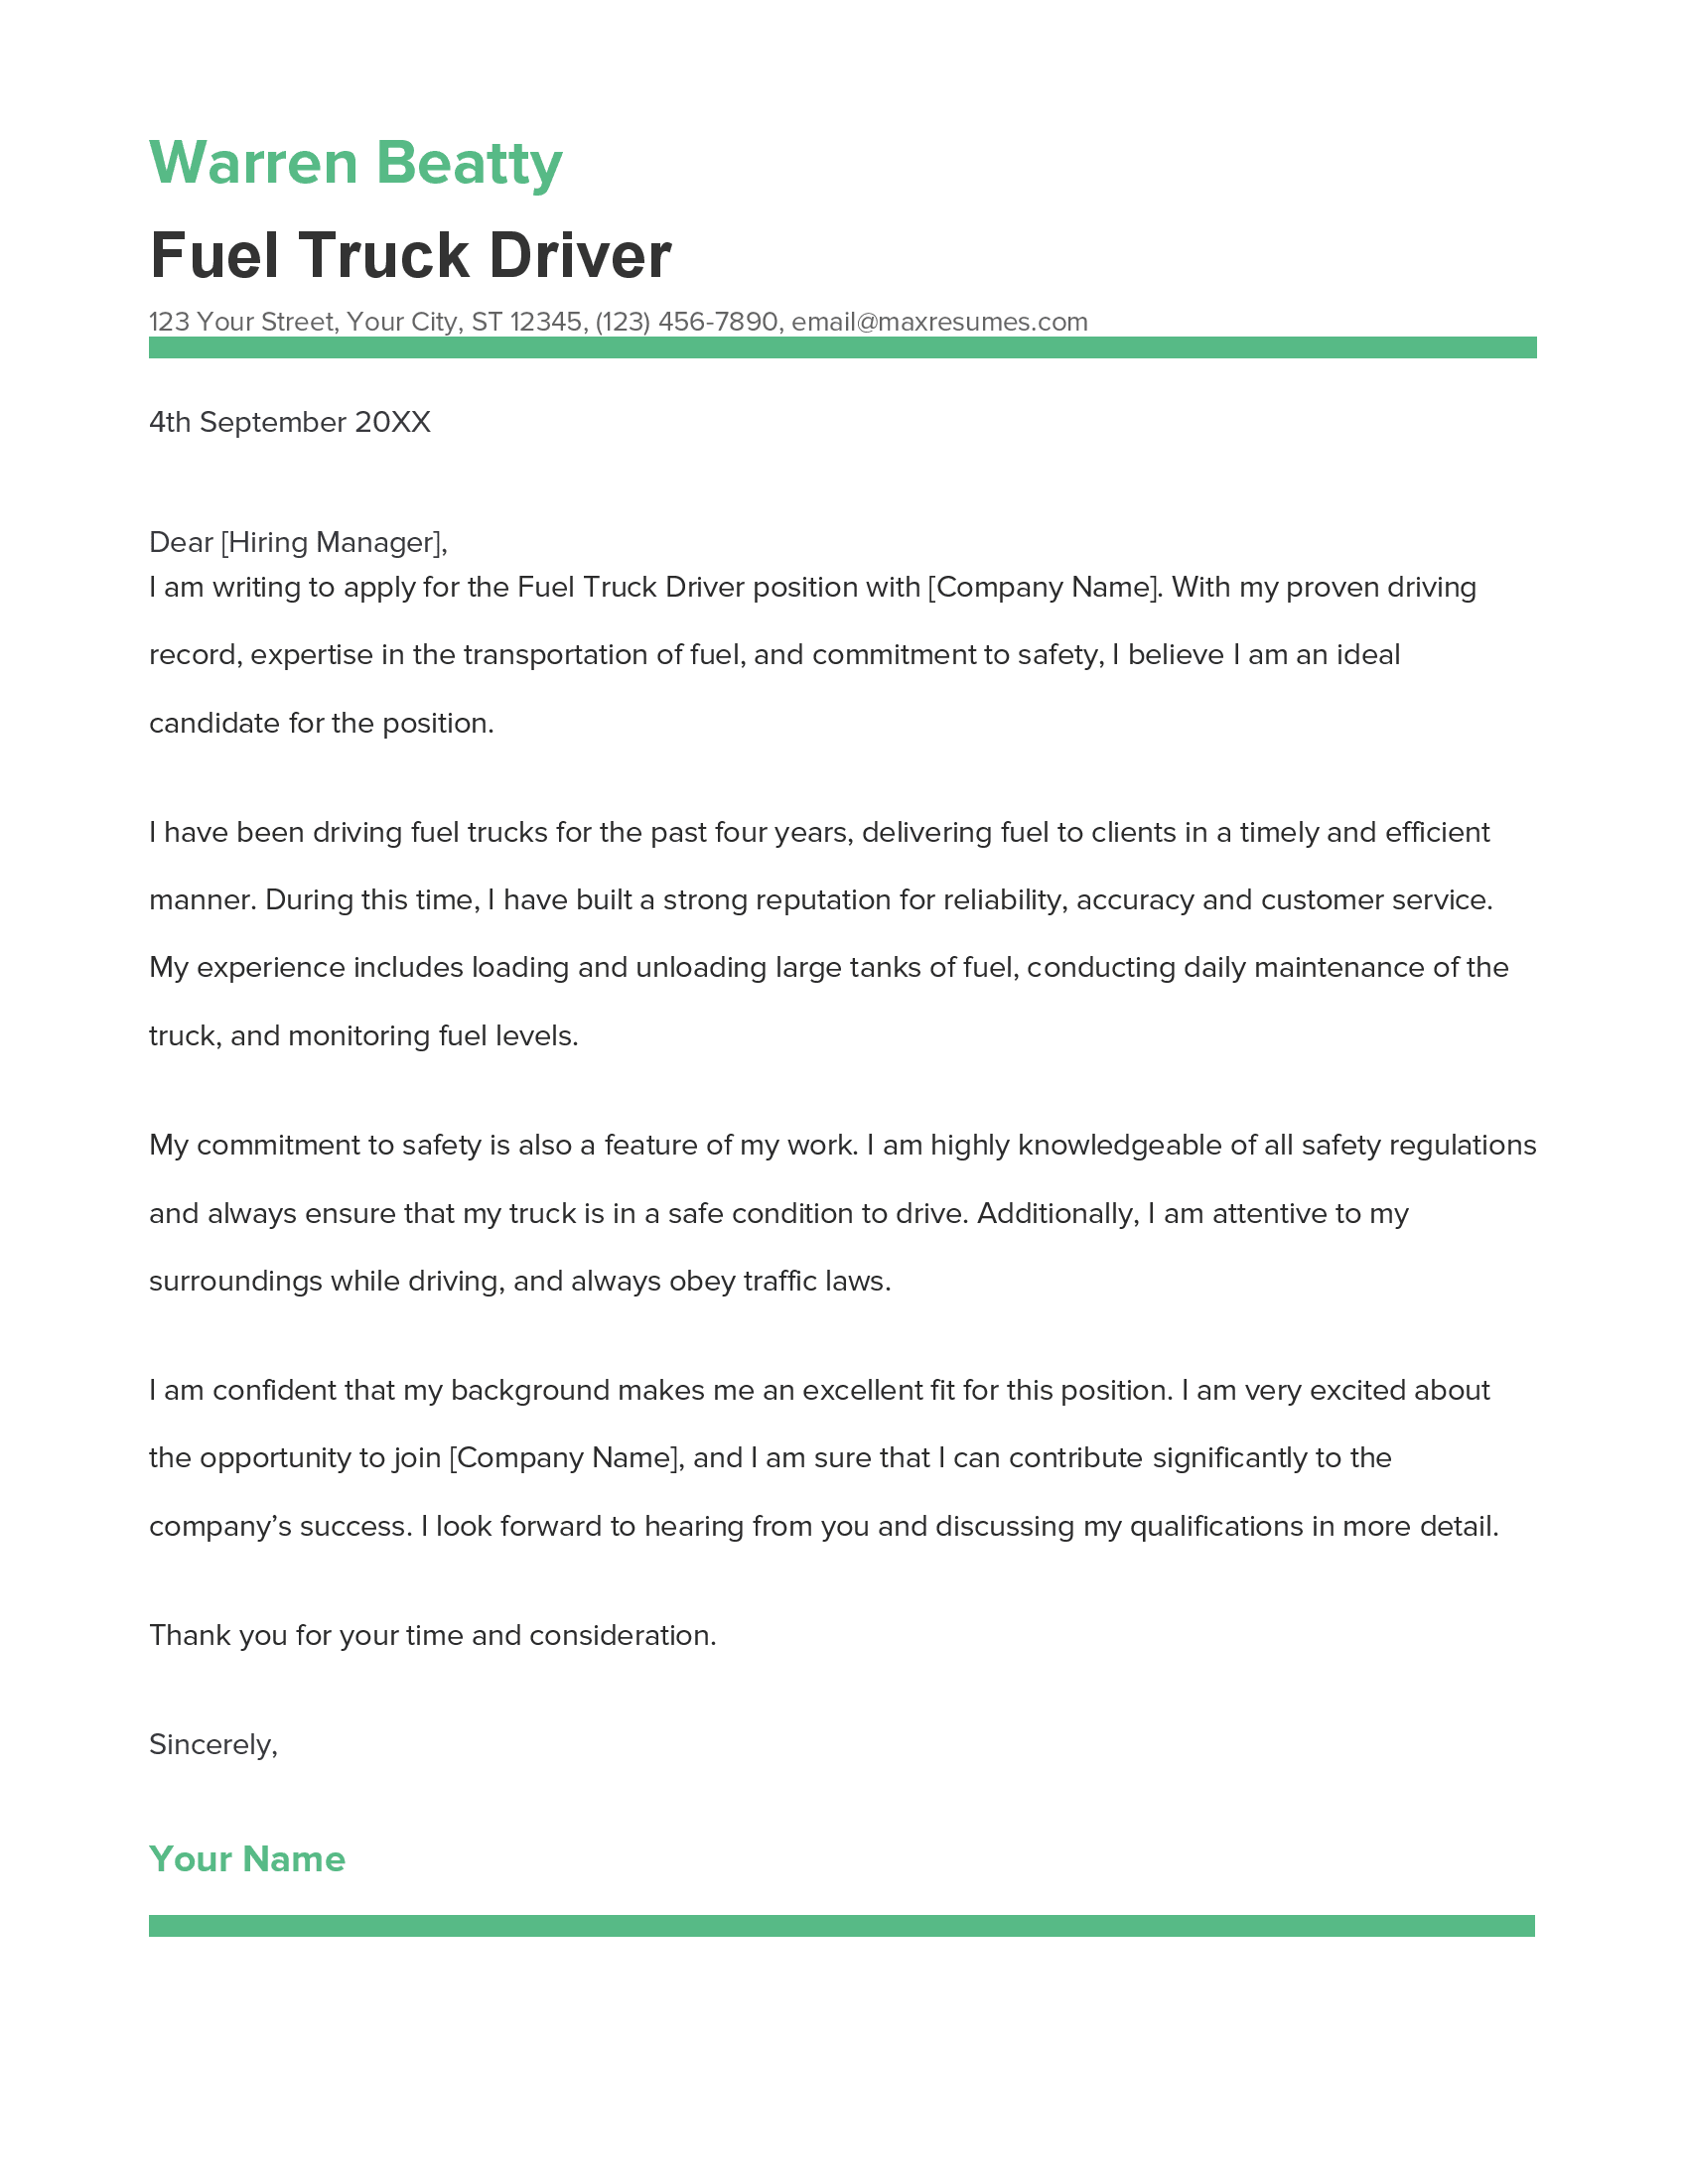 Fuel Truck Driver Cover Letter Example